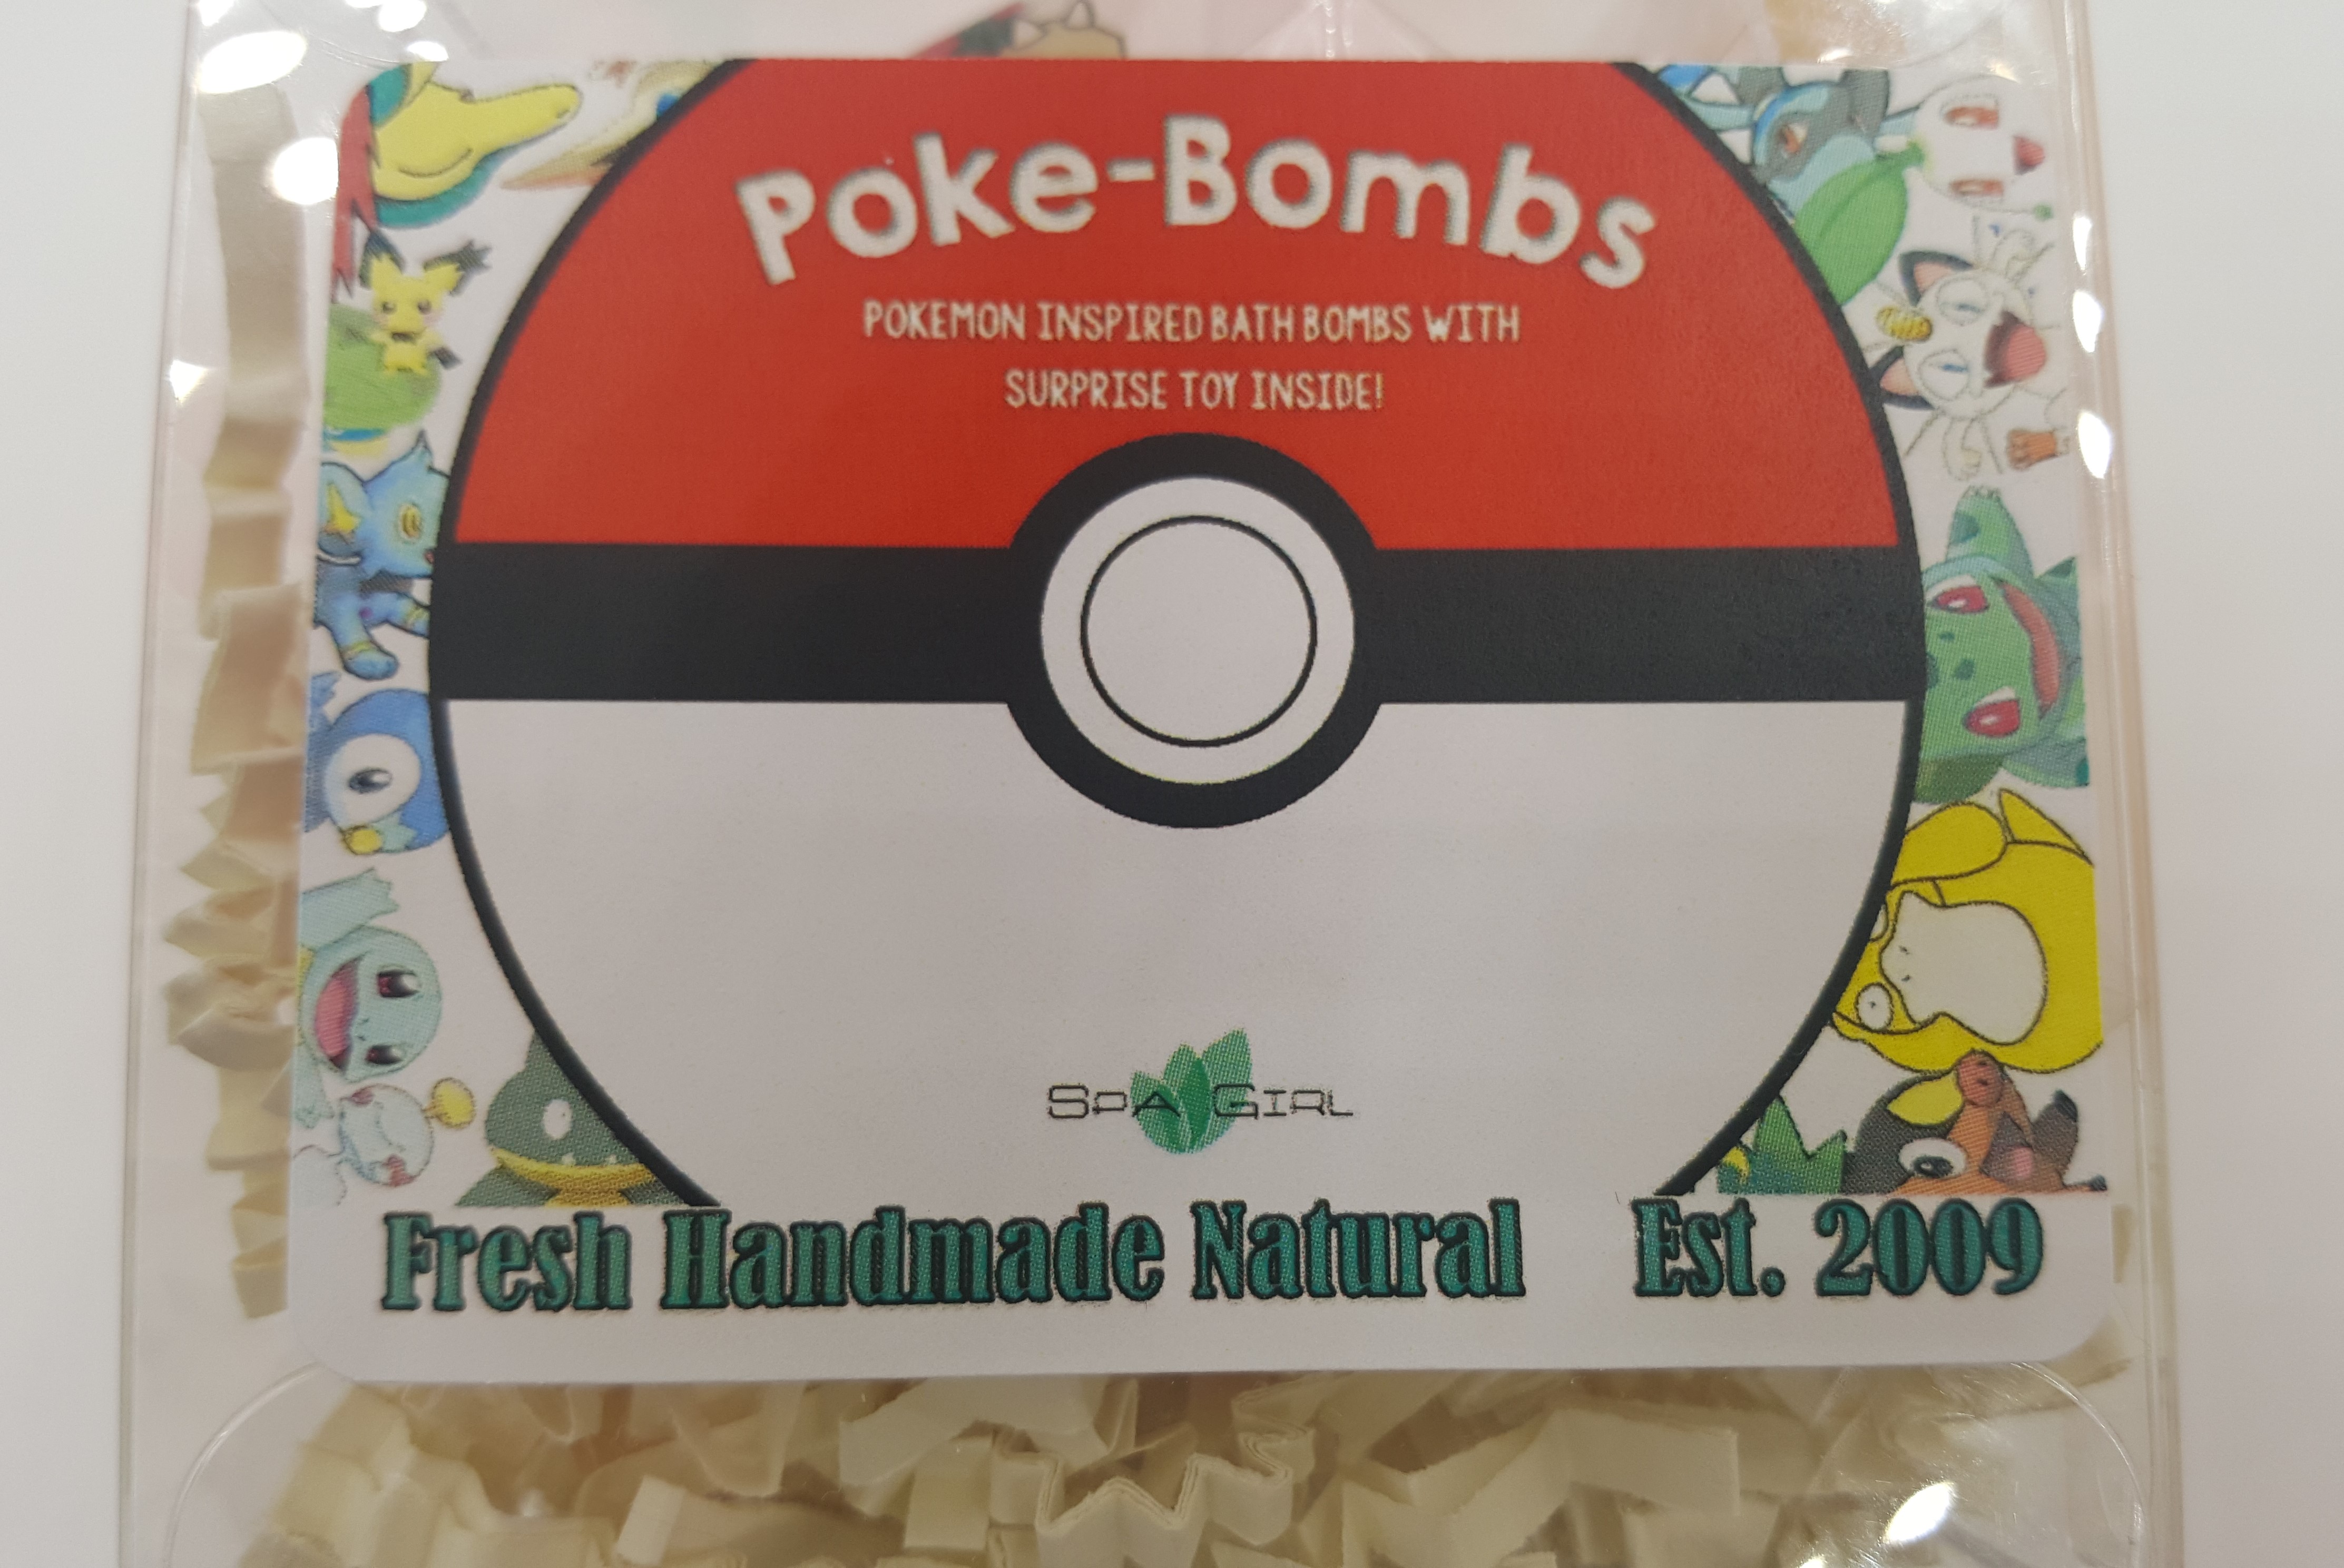 Spa Pure Kids Poke-Bomb Bath Bomb with Poke-Mon Toy Inside, USA Made (Pack of 1) - image 4 of 5